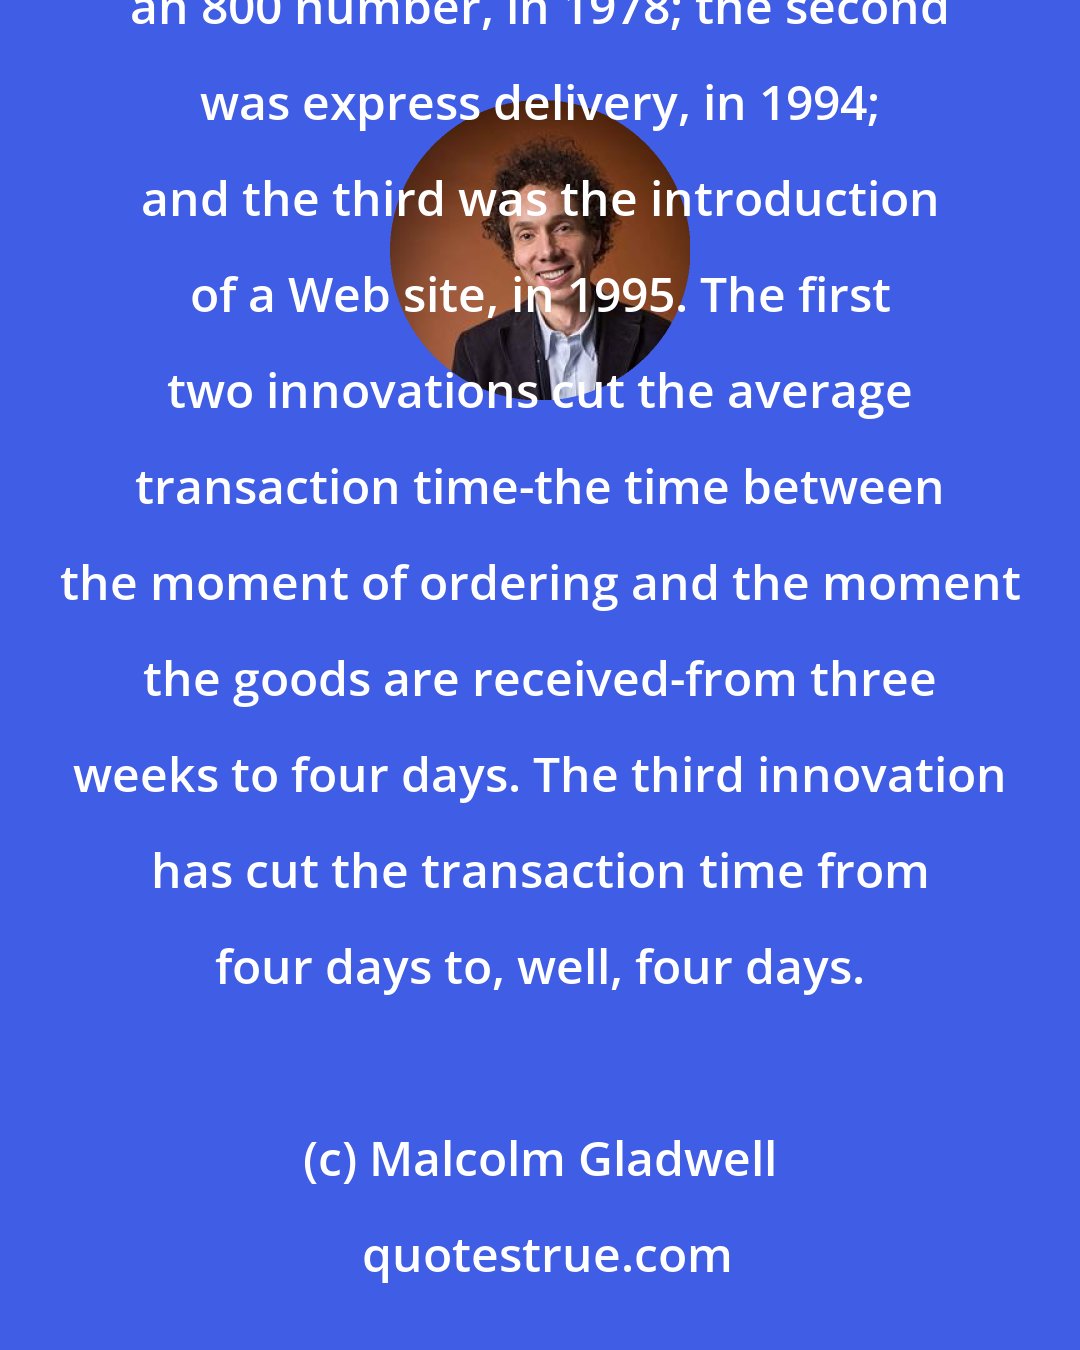 Malcolm Gladwell: Lands' End has undergone three major changes over the past couple of decades. The first was the introduction of an 800 number, in 1978; the second was express delivery, in 1994; and the third was the introduction of a Web site, in 1995. The first two innovations cut the average transaction time-the time between the moment of ordering and the moment the goods are received-from three weeks to four days. The third innovation has cut the transaction time from four days to, well, four days.